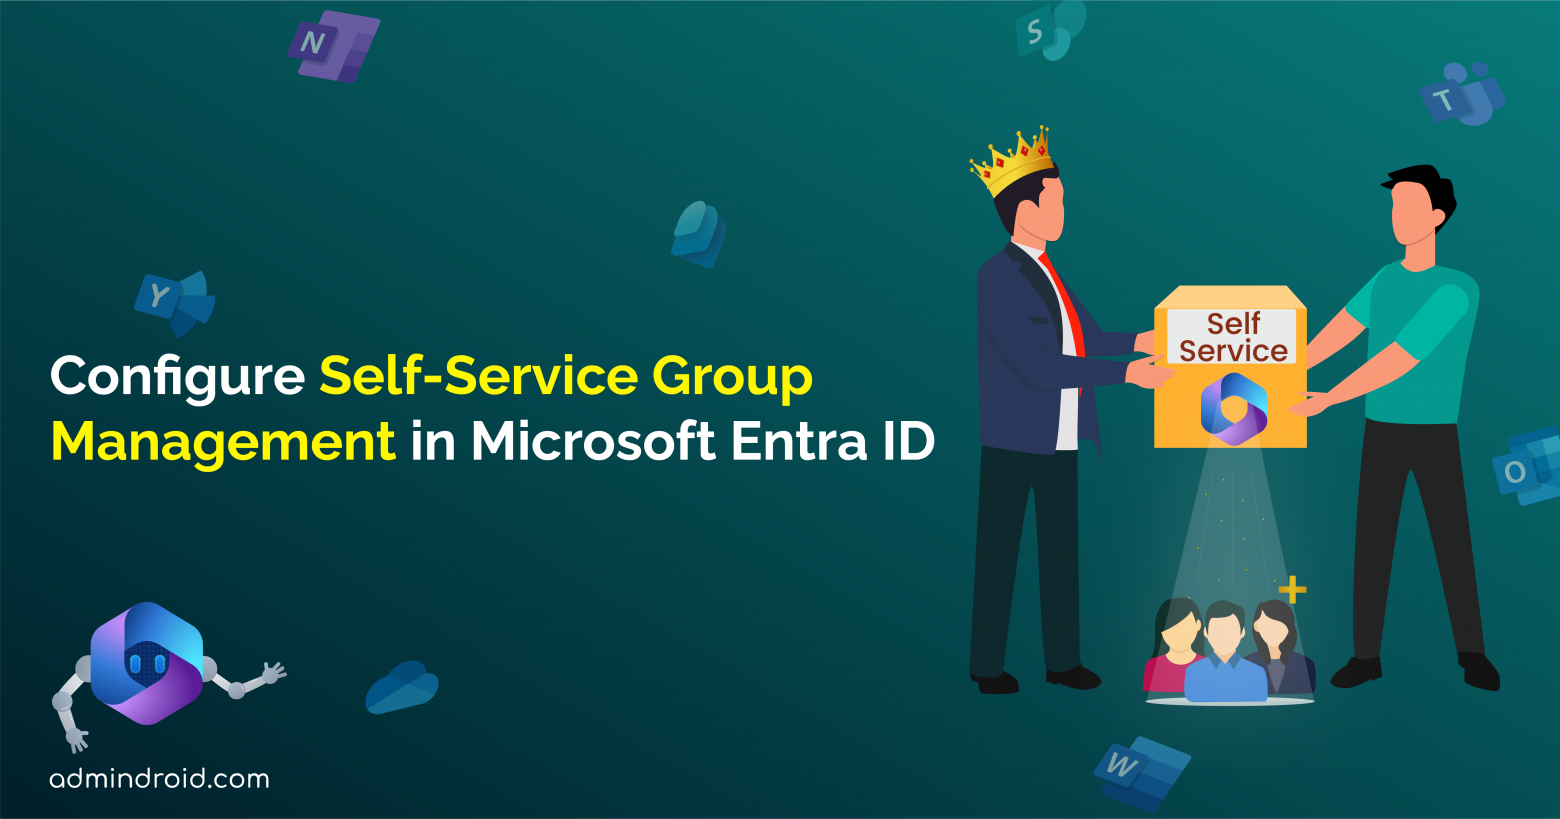 Configure Self-Service Group Management in Microsoft Entra ID